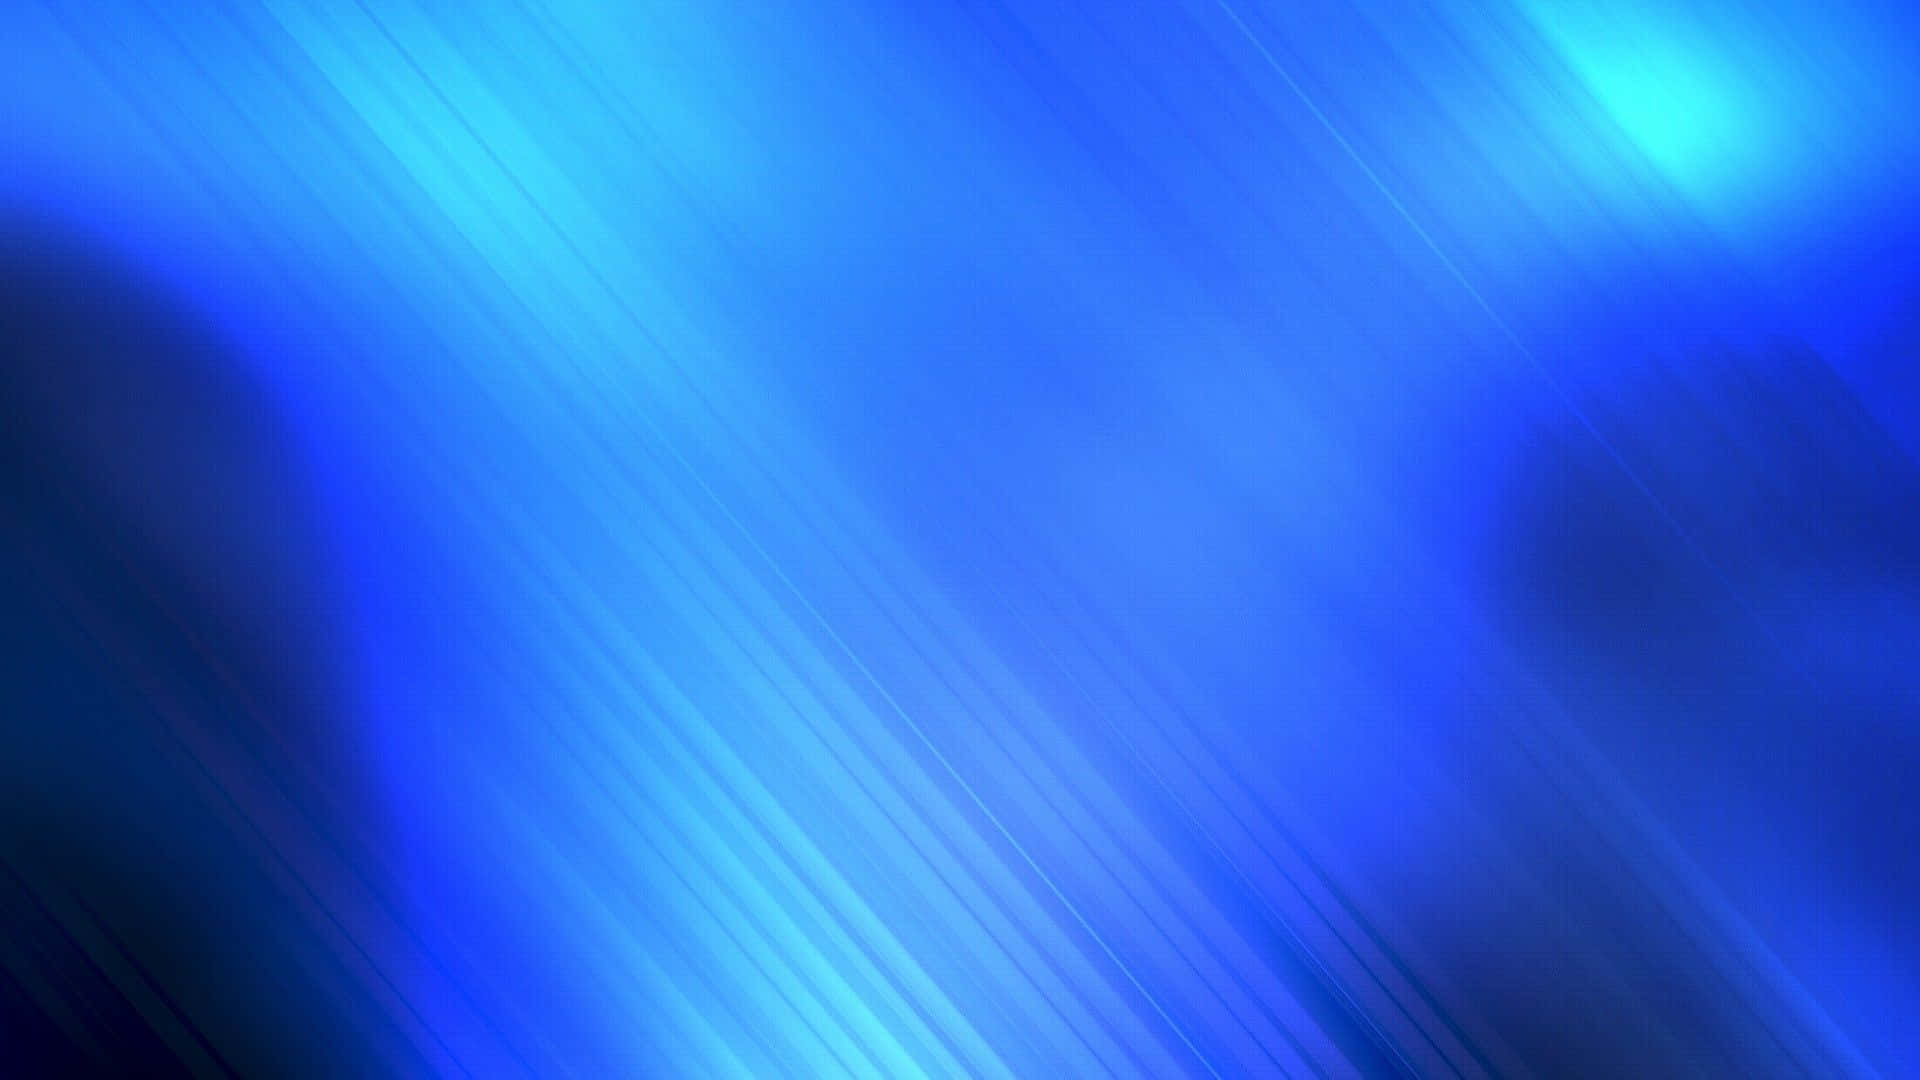 Blue Abstract Background With Light Streaks Wallpaper